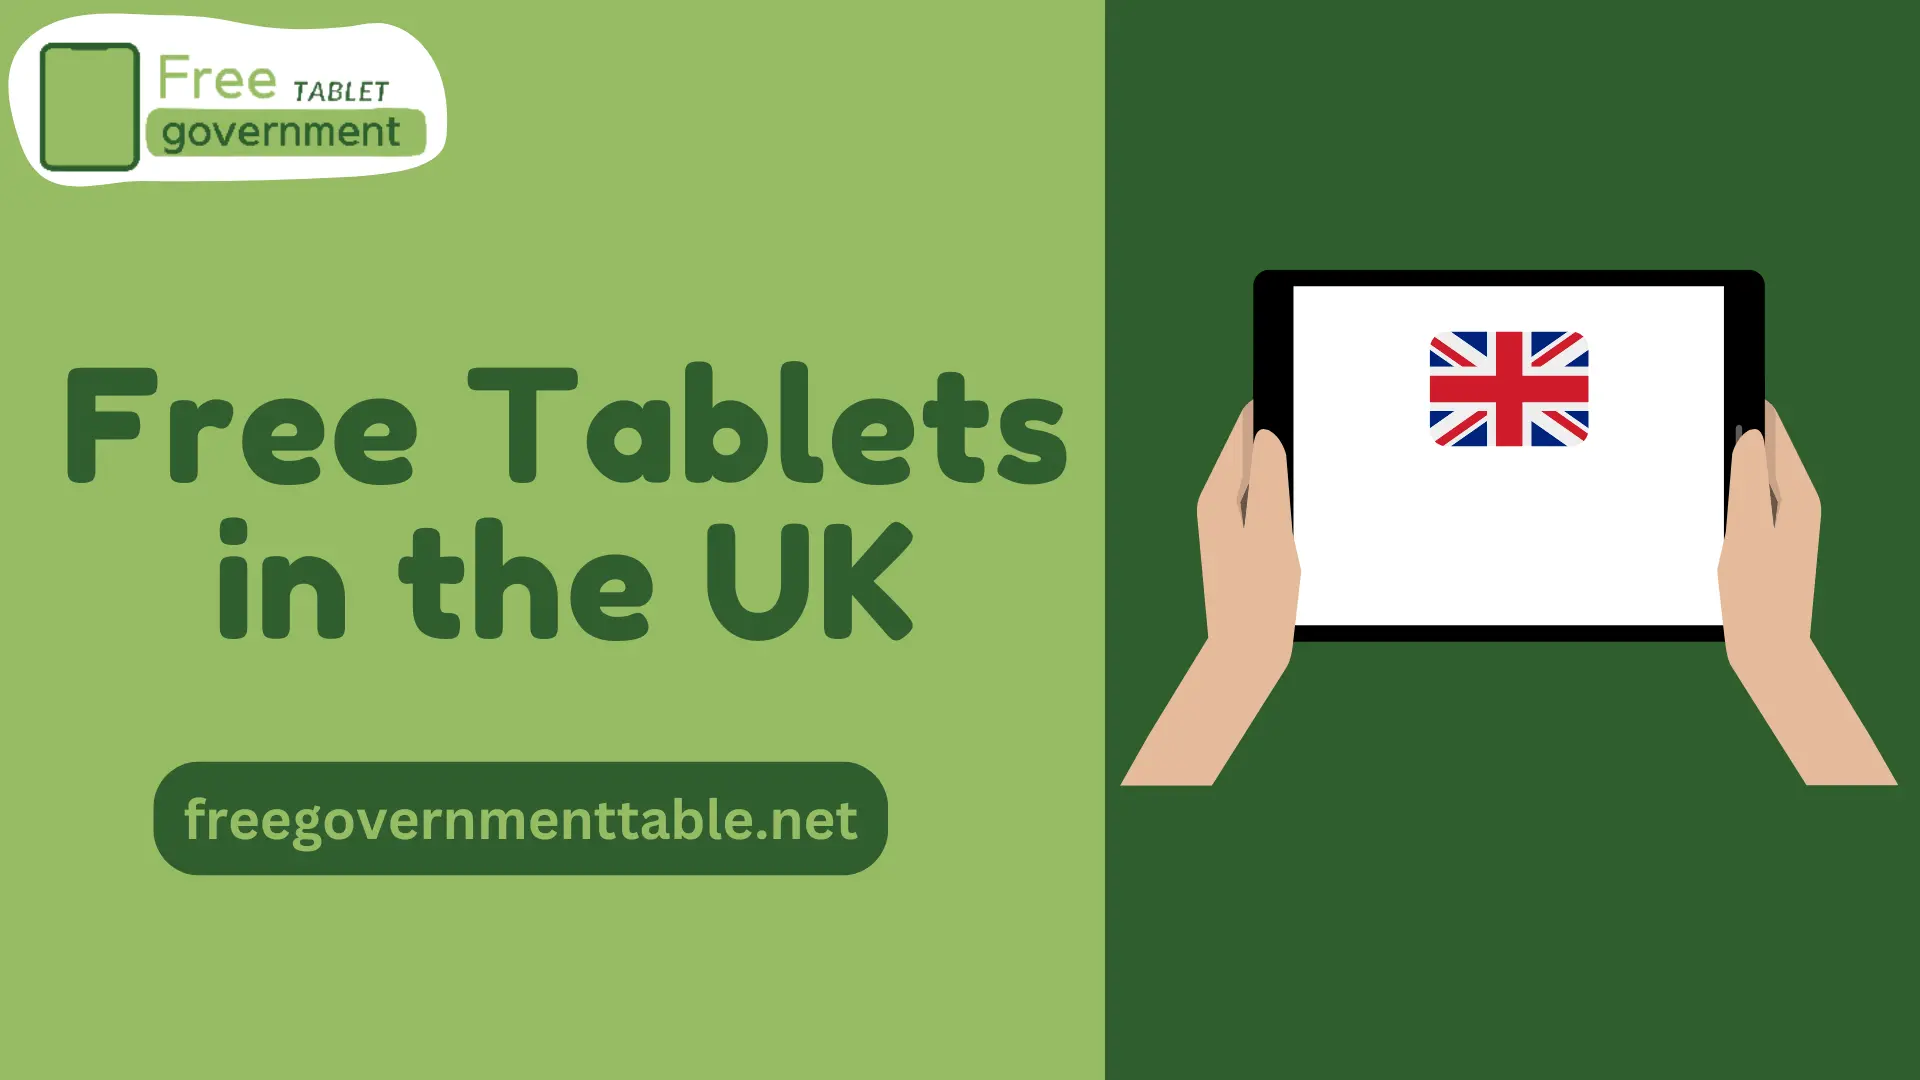 Free Tablet in the UK